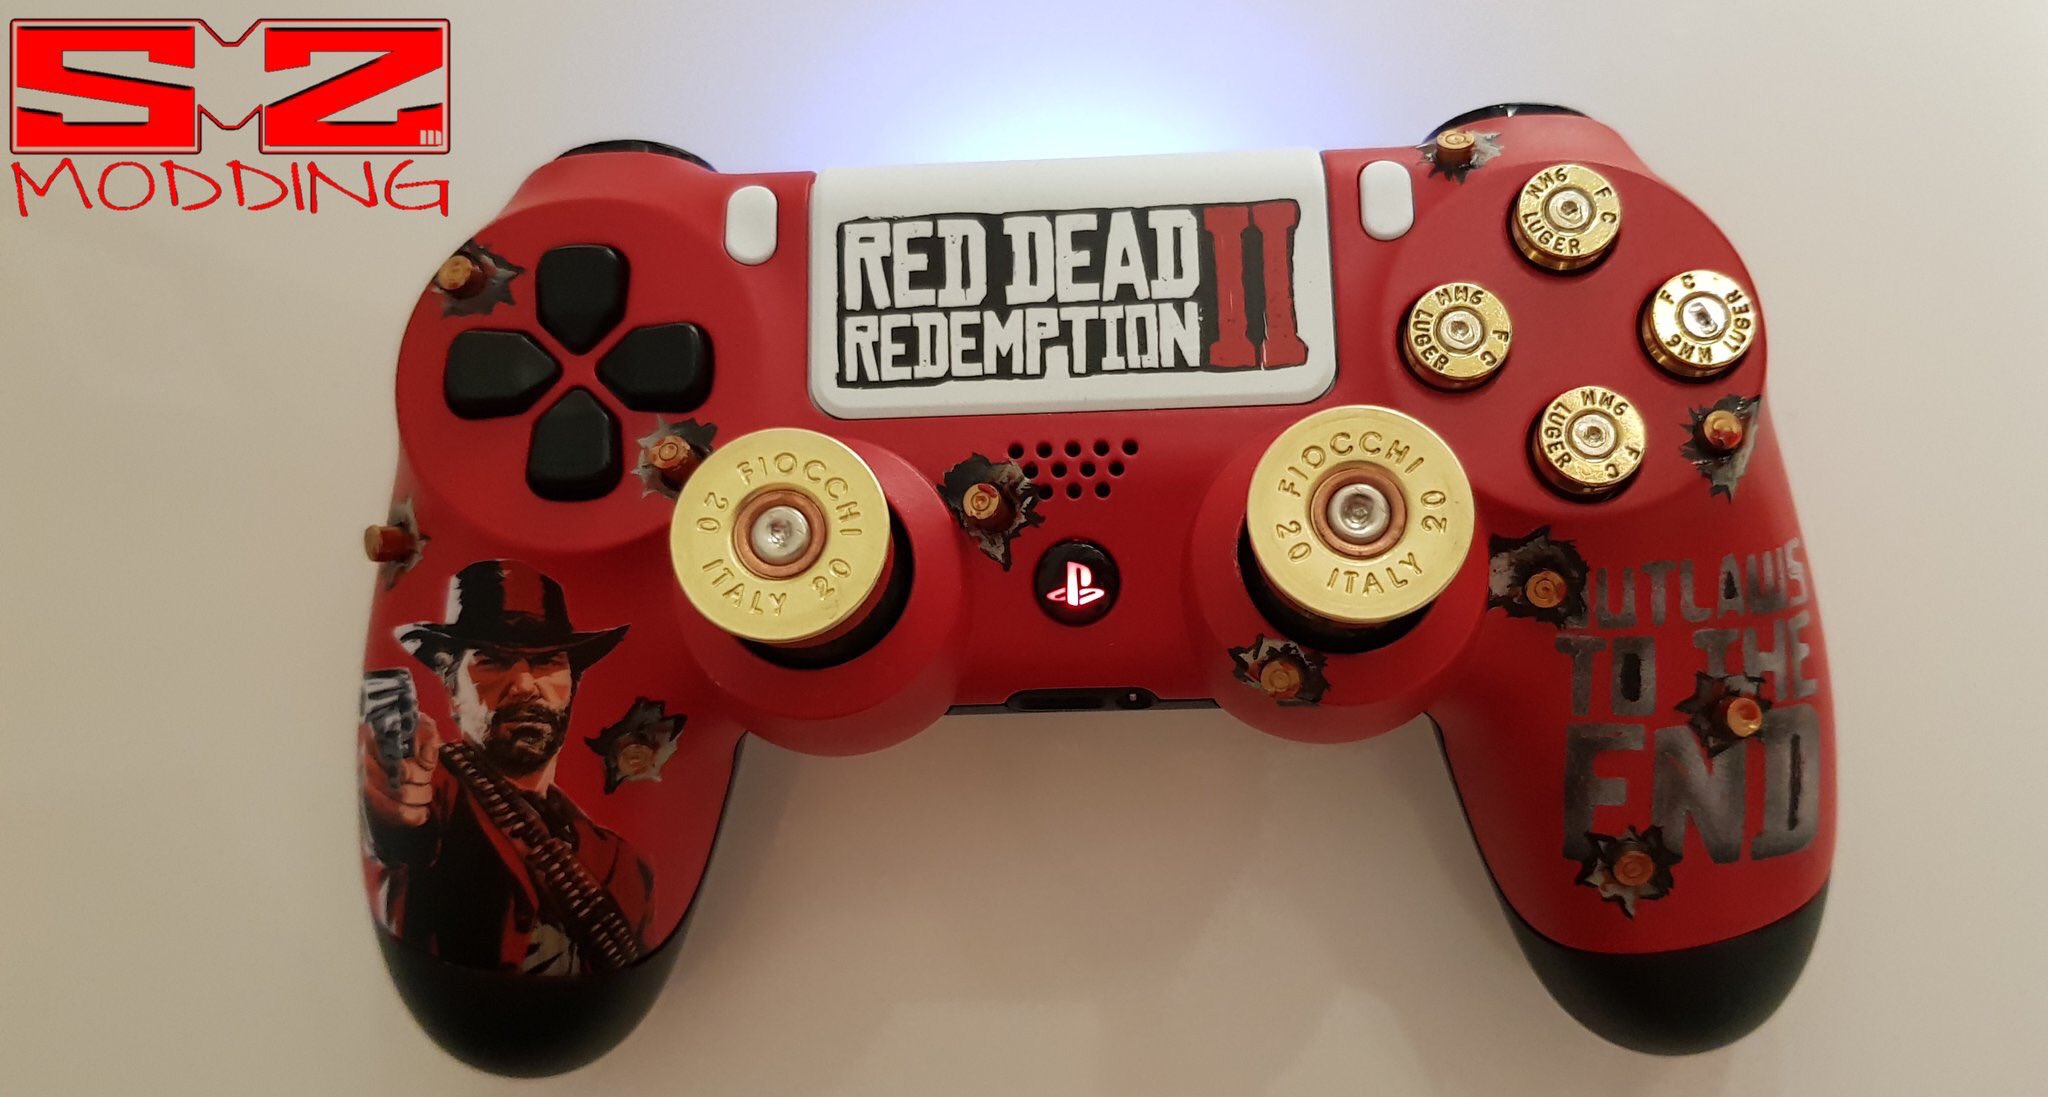 Using a PS4/PS5 Controller for PC RDR2 : r/reddeadredemption